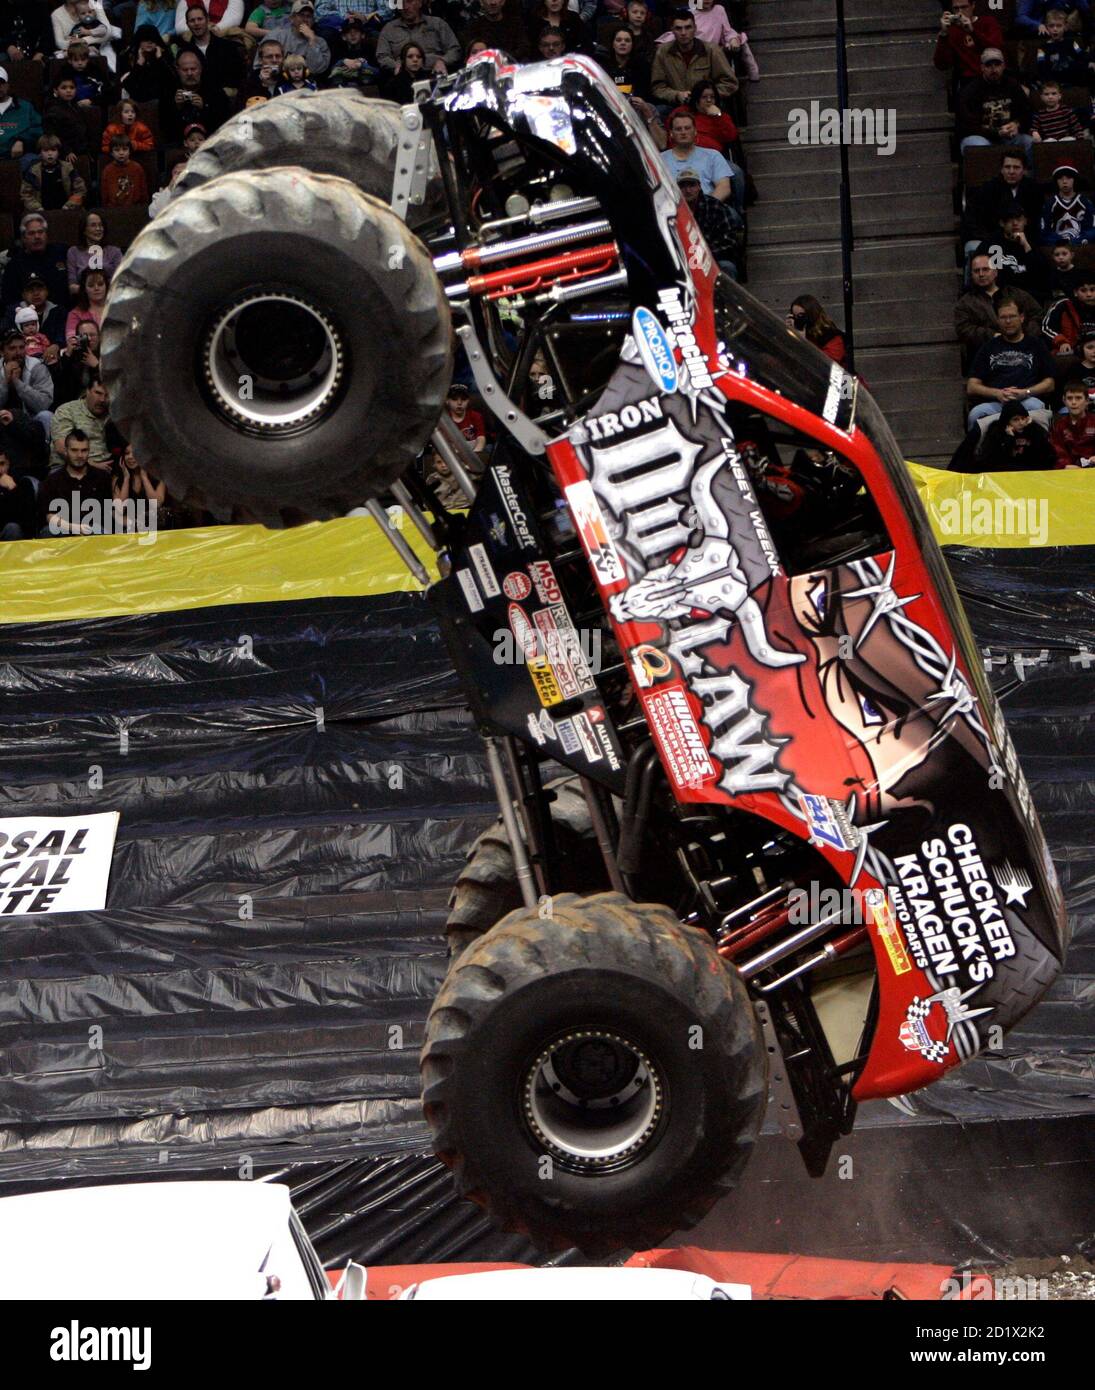 Linsey Weenk Driving Iron Outlaw Does A Wheelie At Monster Jam A Monster Truck Show In Denver Colorado February 10 2007 Reuters Rick Wilking United States Stock Photo Alamy